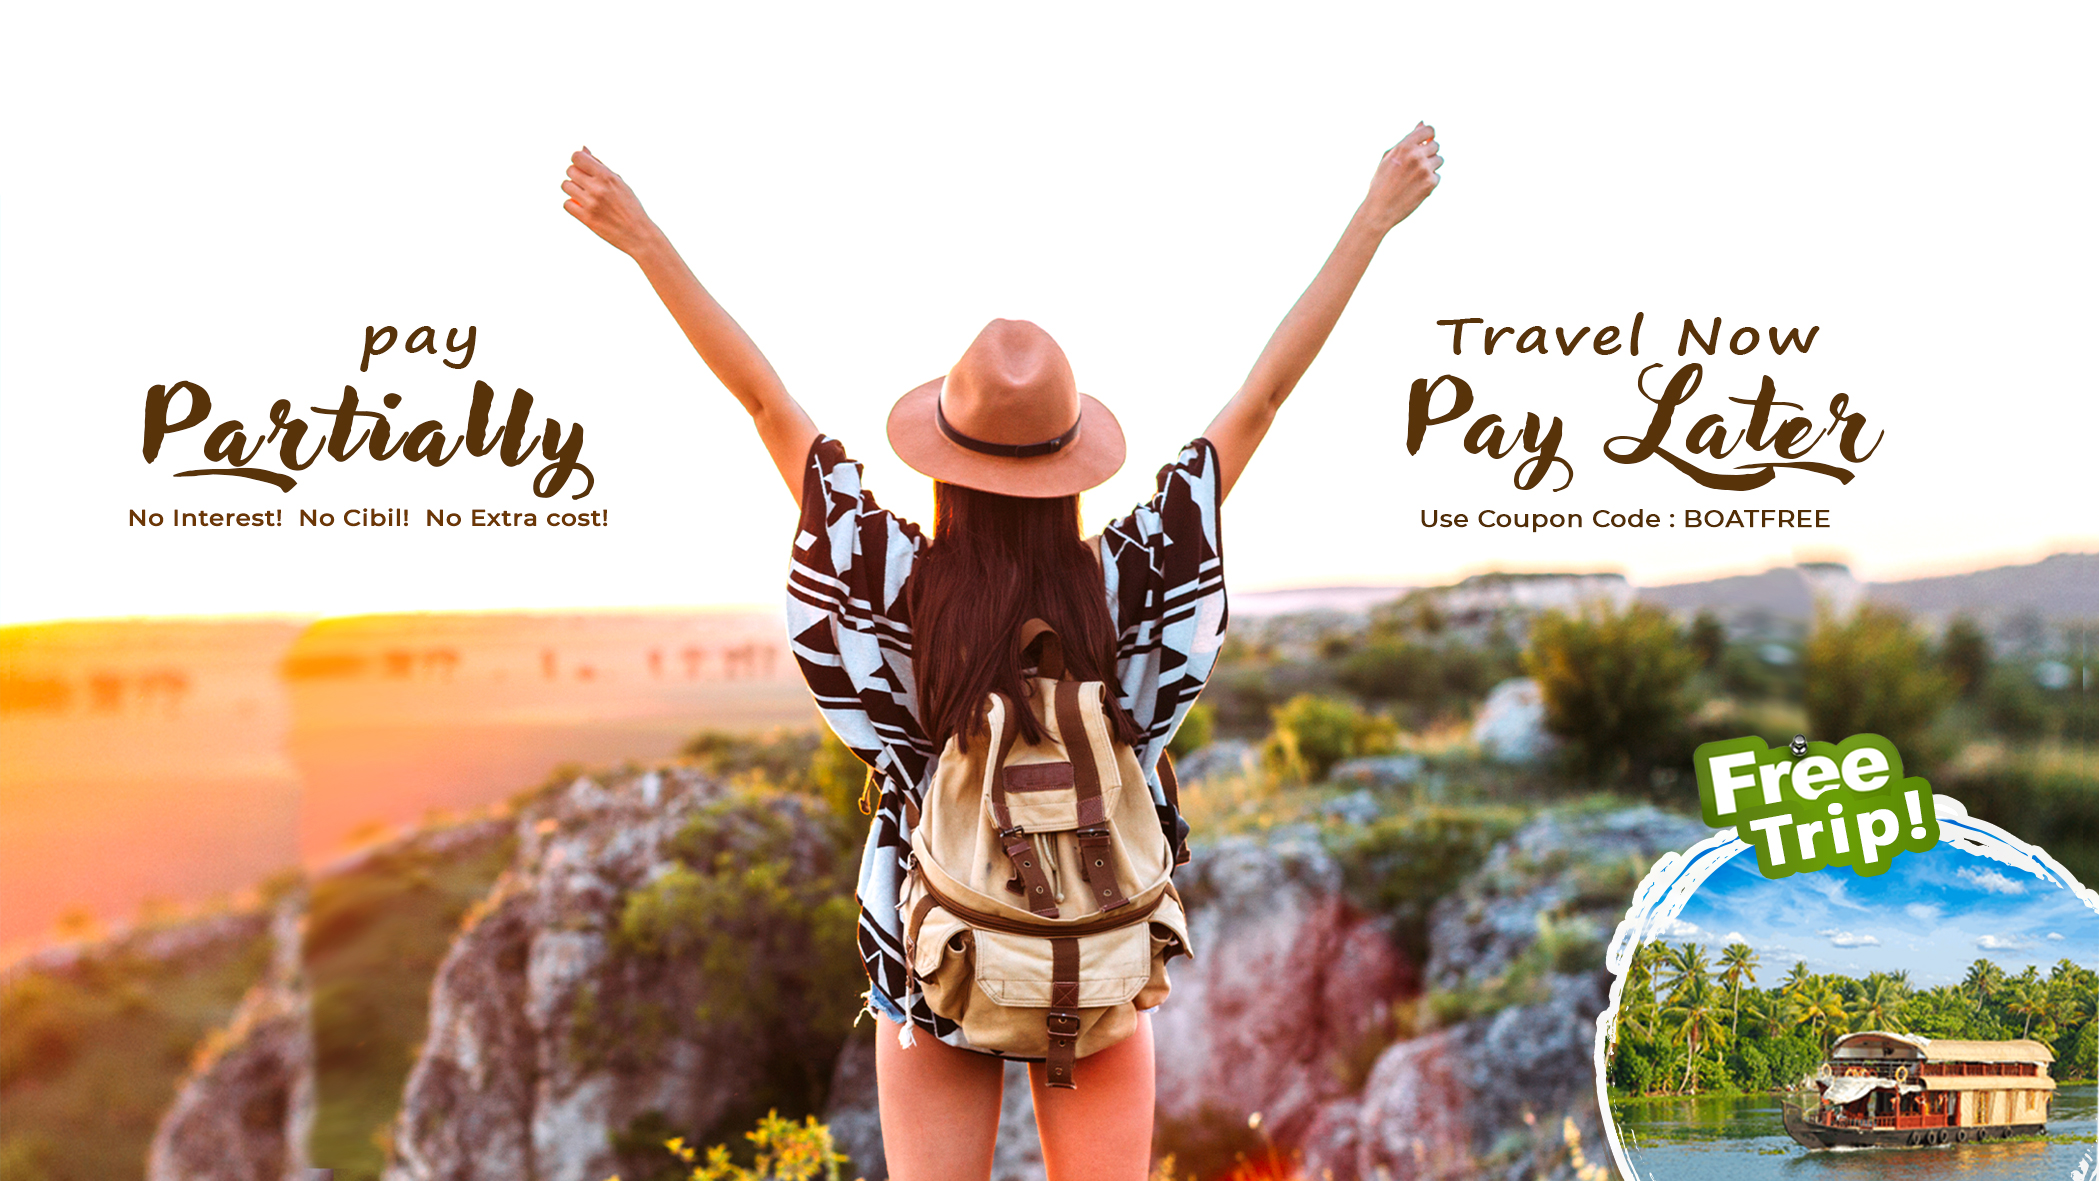 travel now pay later uk